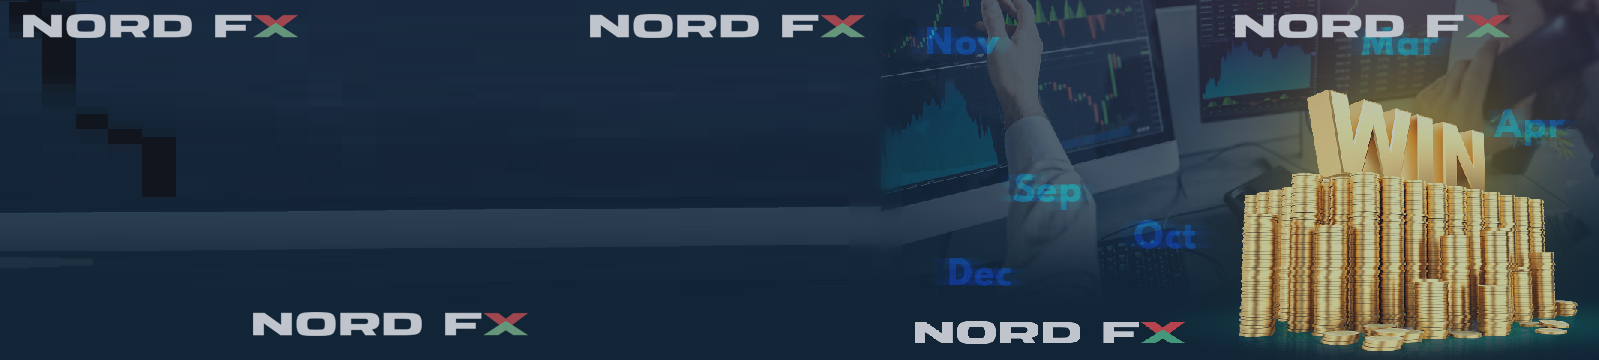 June 2021 Results: Three NordFX Traders' Profits Exceed $445,000